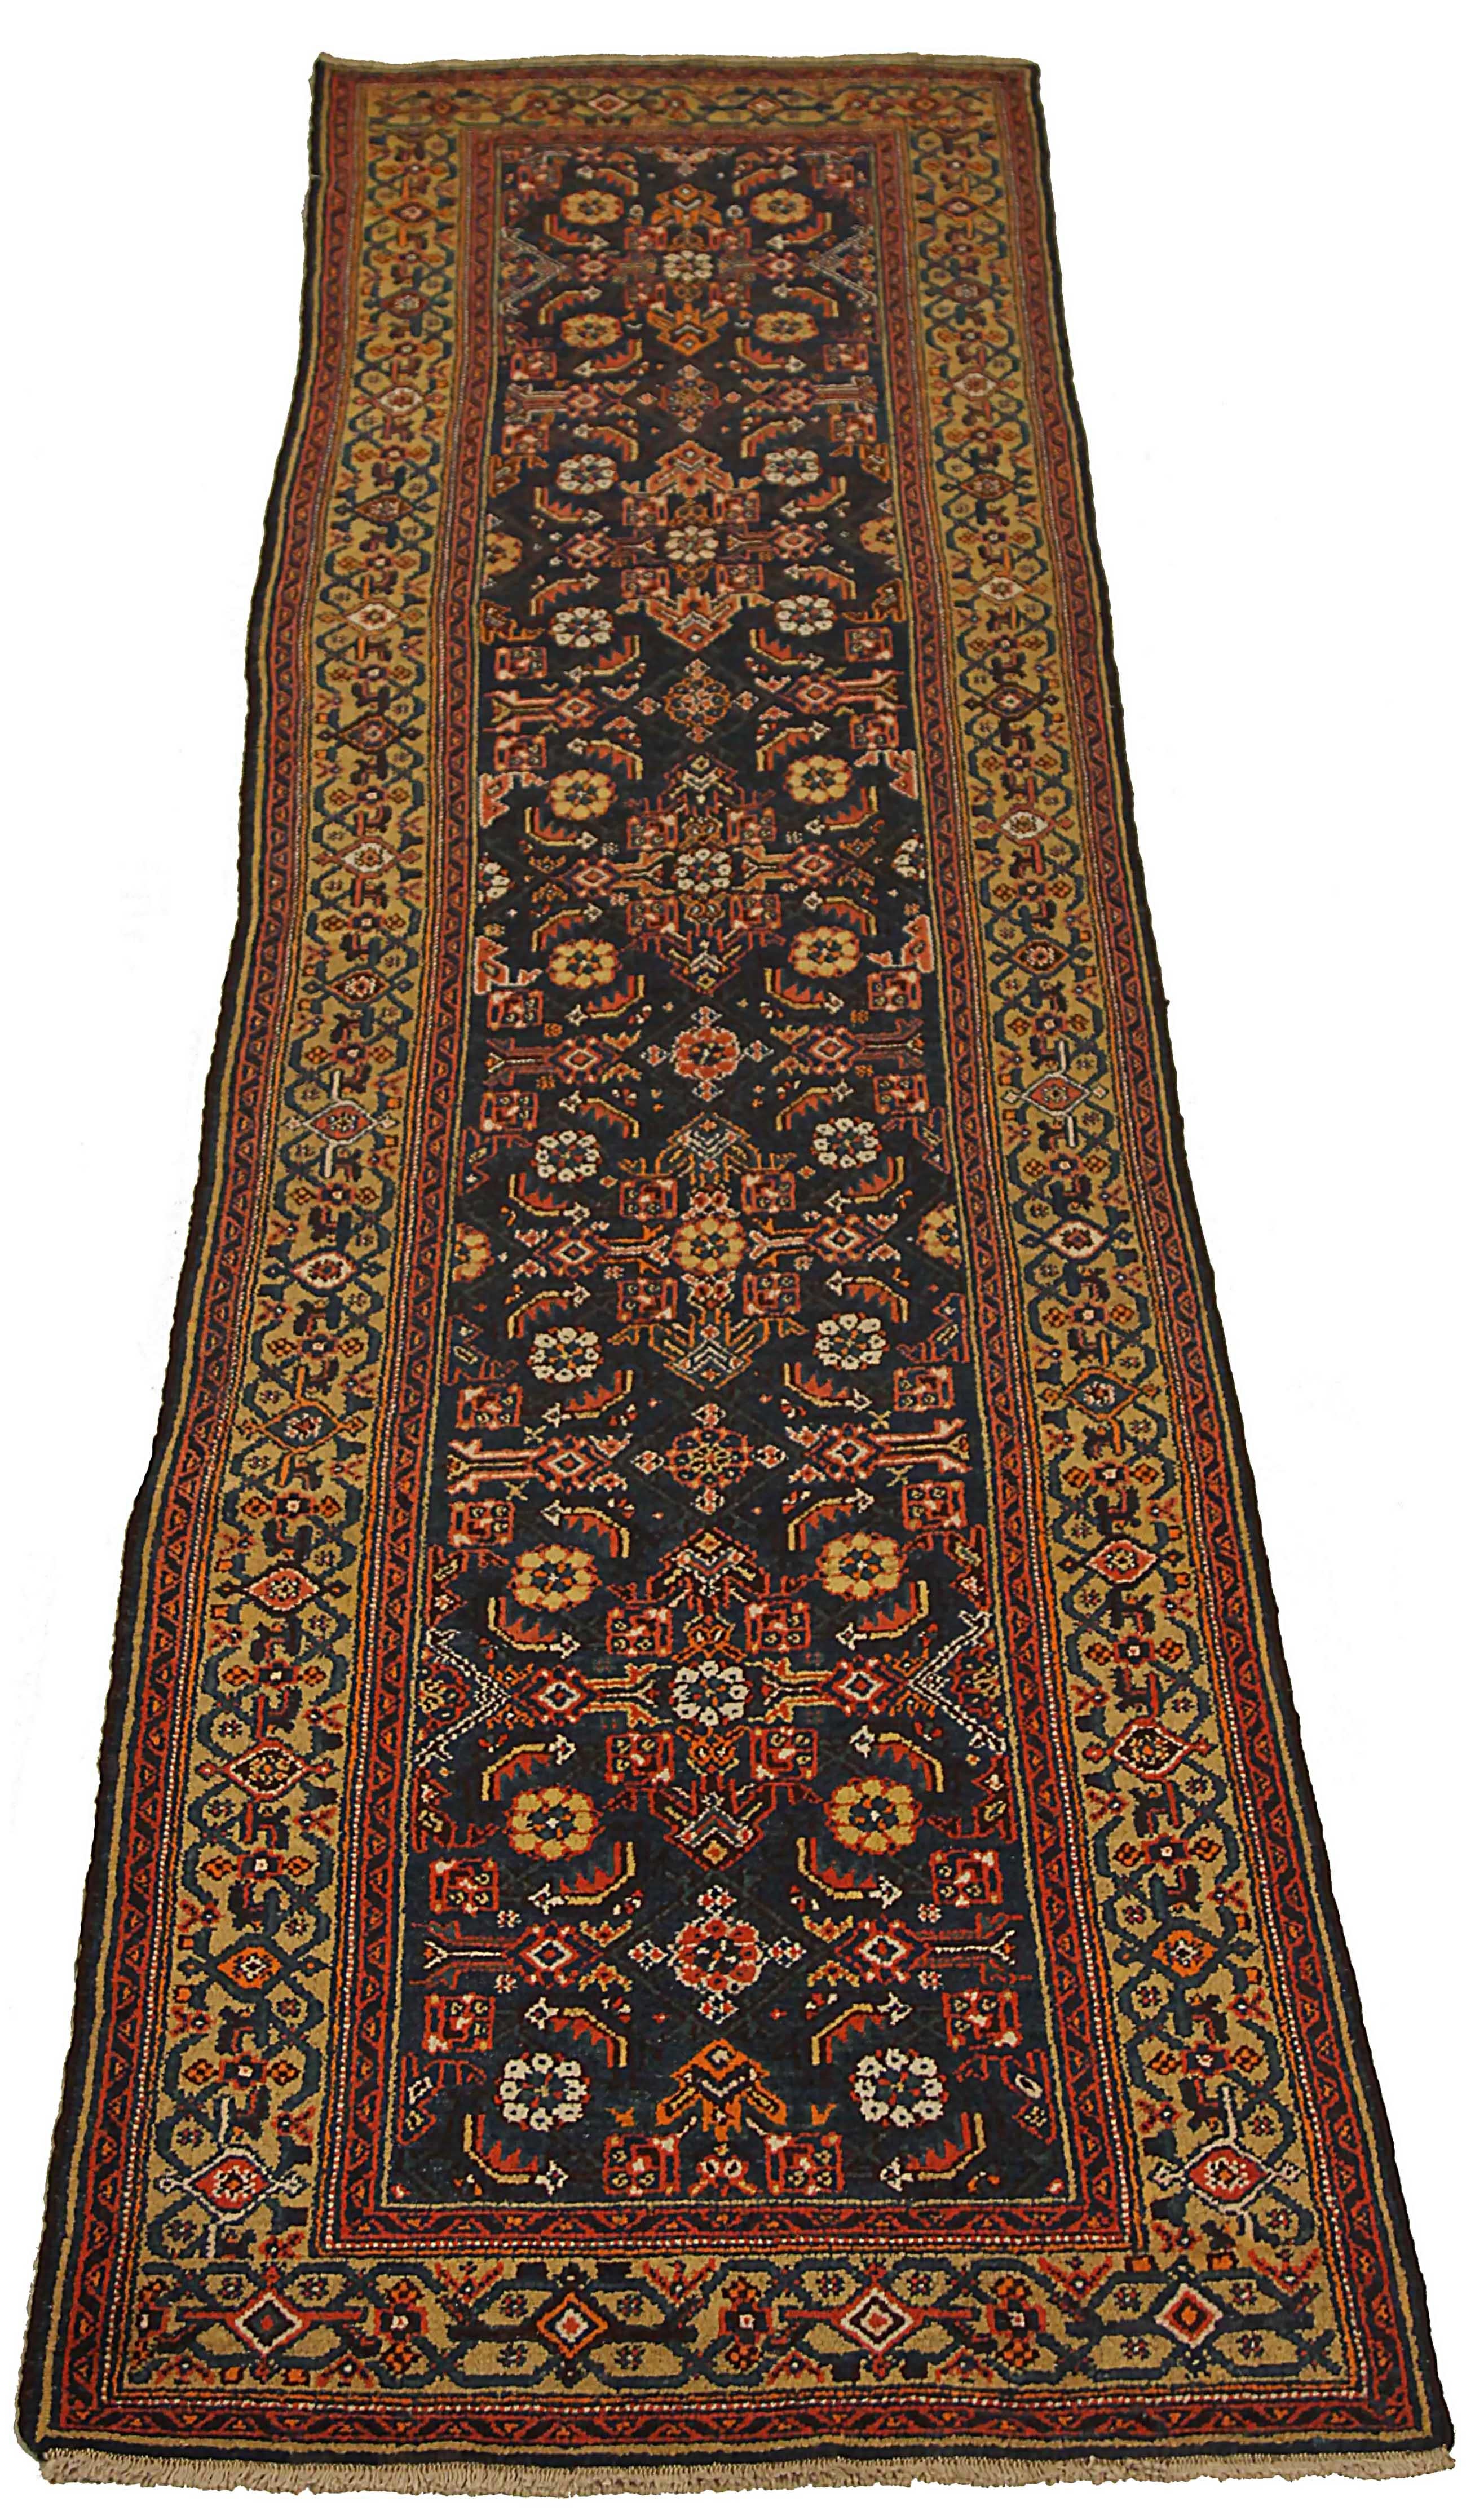 Antique Persian area rug handwoven from the finest sheep’s wool. It’s colored with all-natural vegetable dyes that are safe for humans and pets. It’s a traditional Hamedan design handwoven by expert artisans. It’s a lovely runner rug that can be